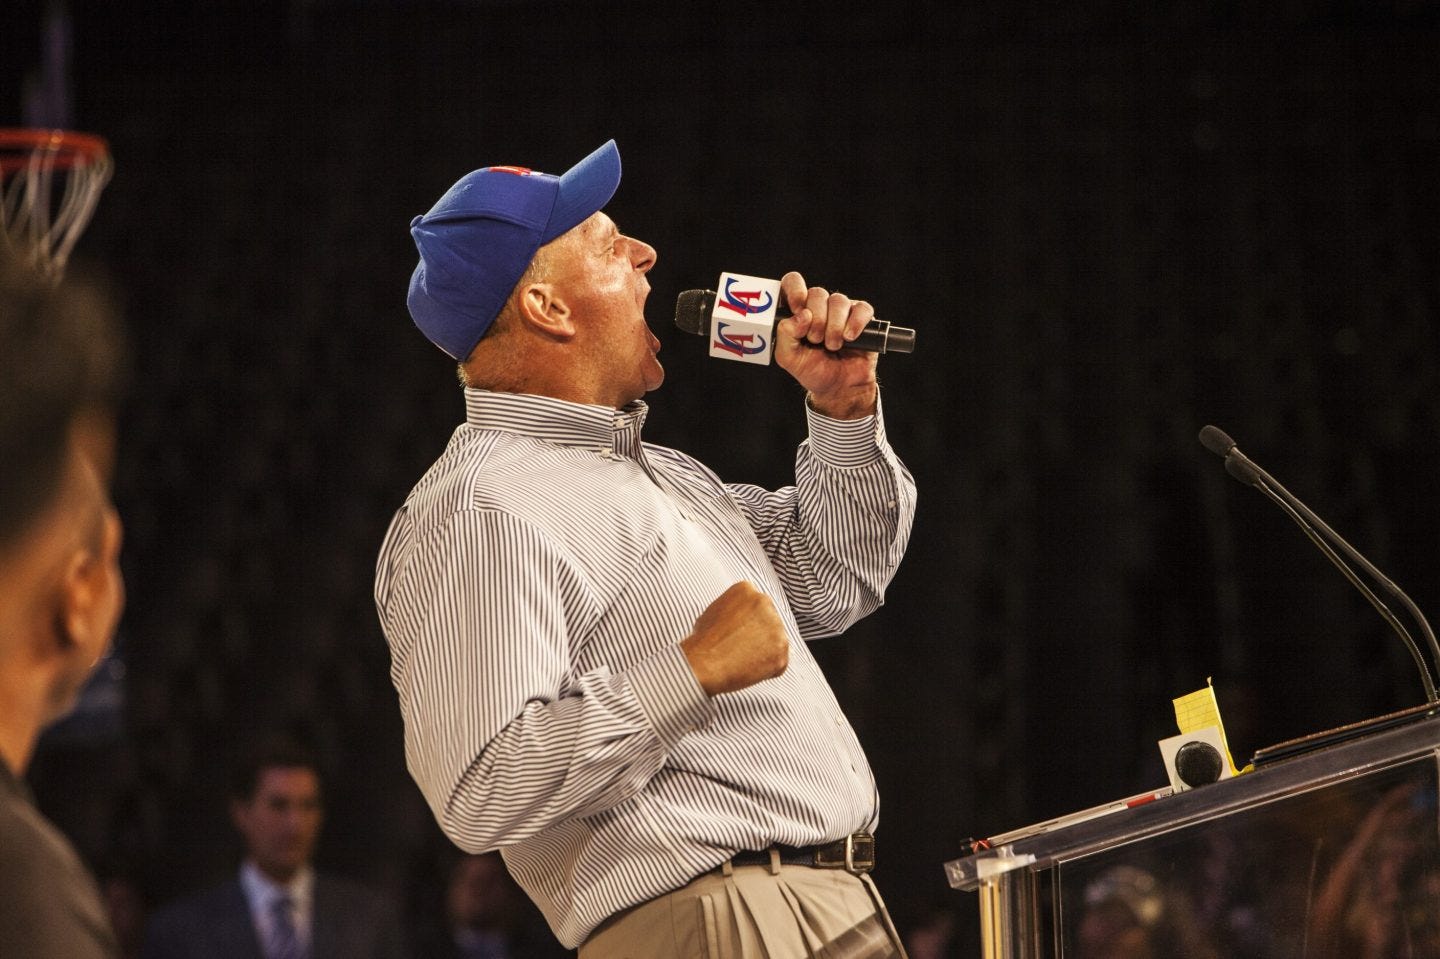 Steve Ballmer, former Microsoft CEO and current owner of the LA Clippers, at a fan rally in Staples Center.